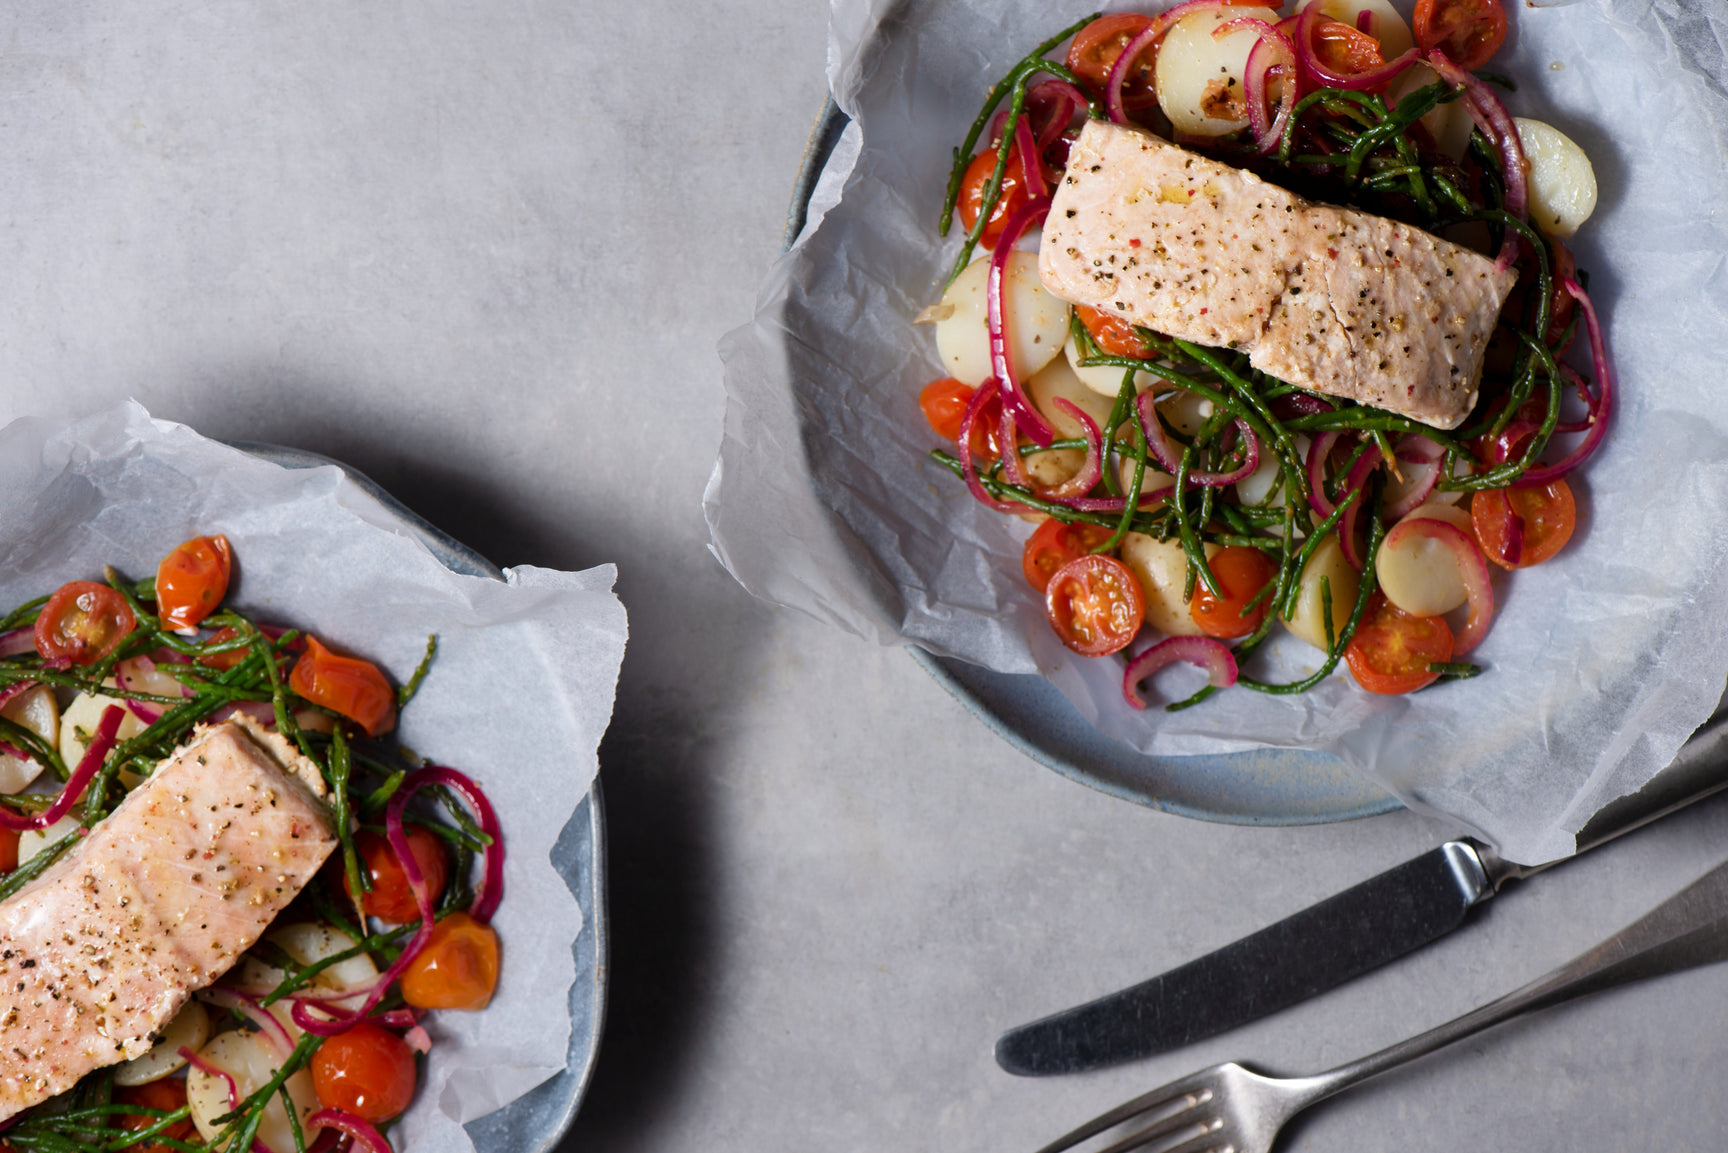 Keta salmon and new potatoes cooked en papillote, with samphire and cherry tomatoes